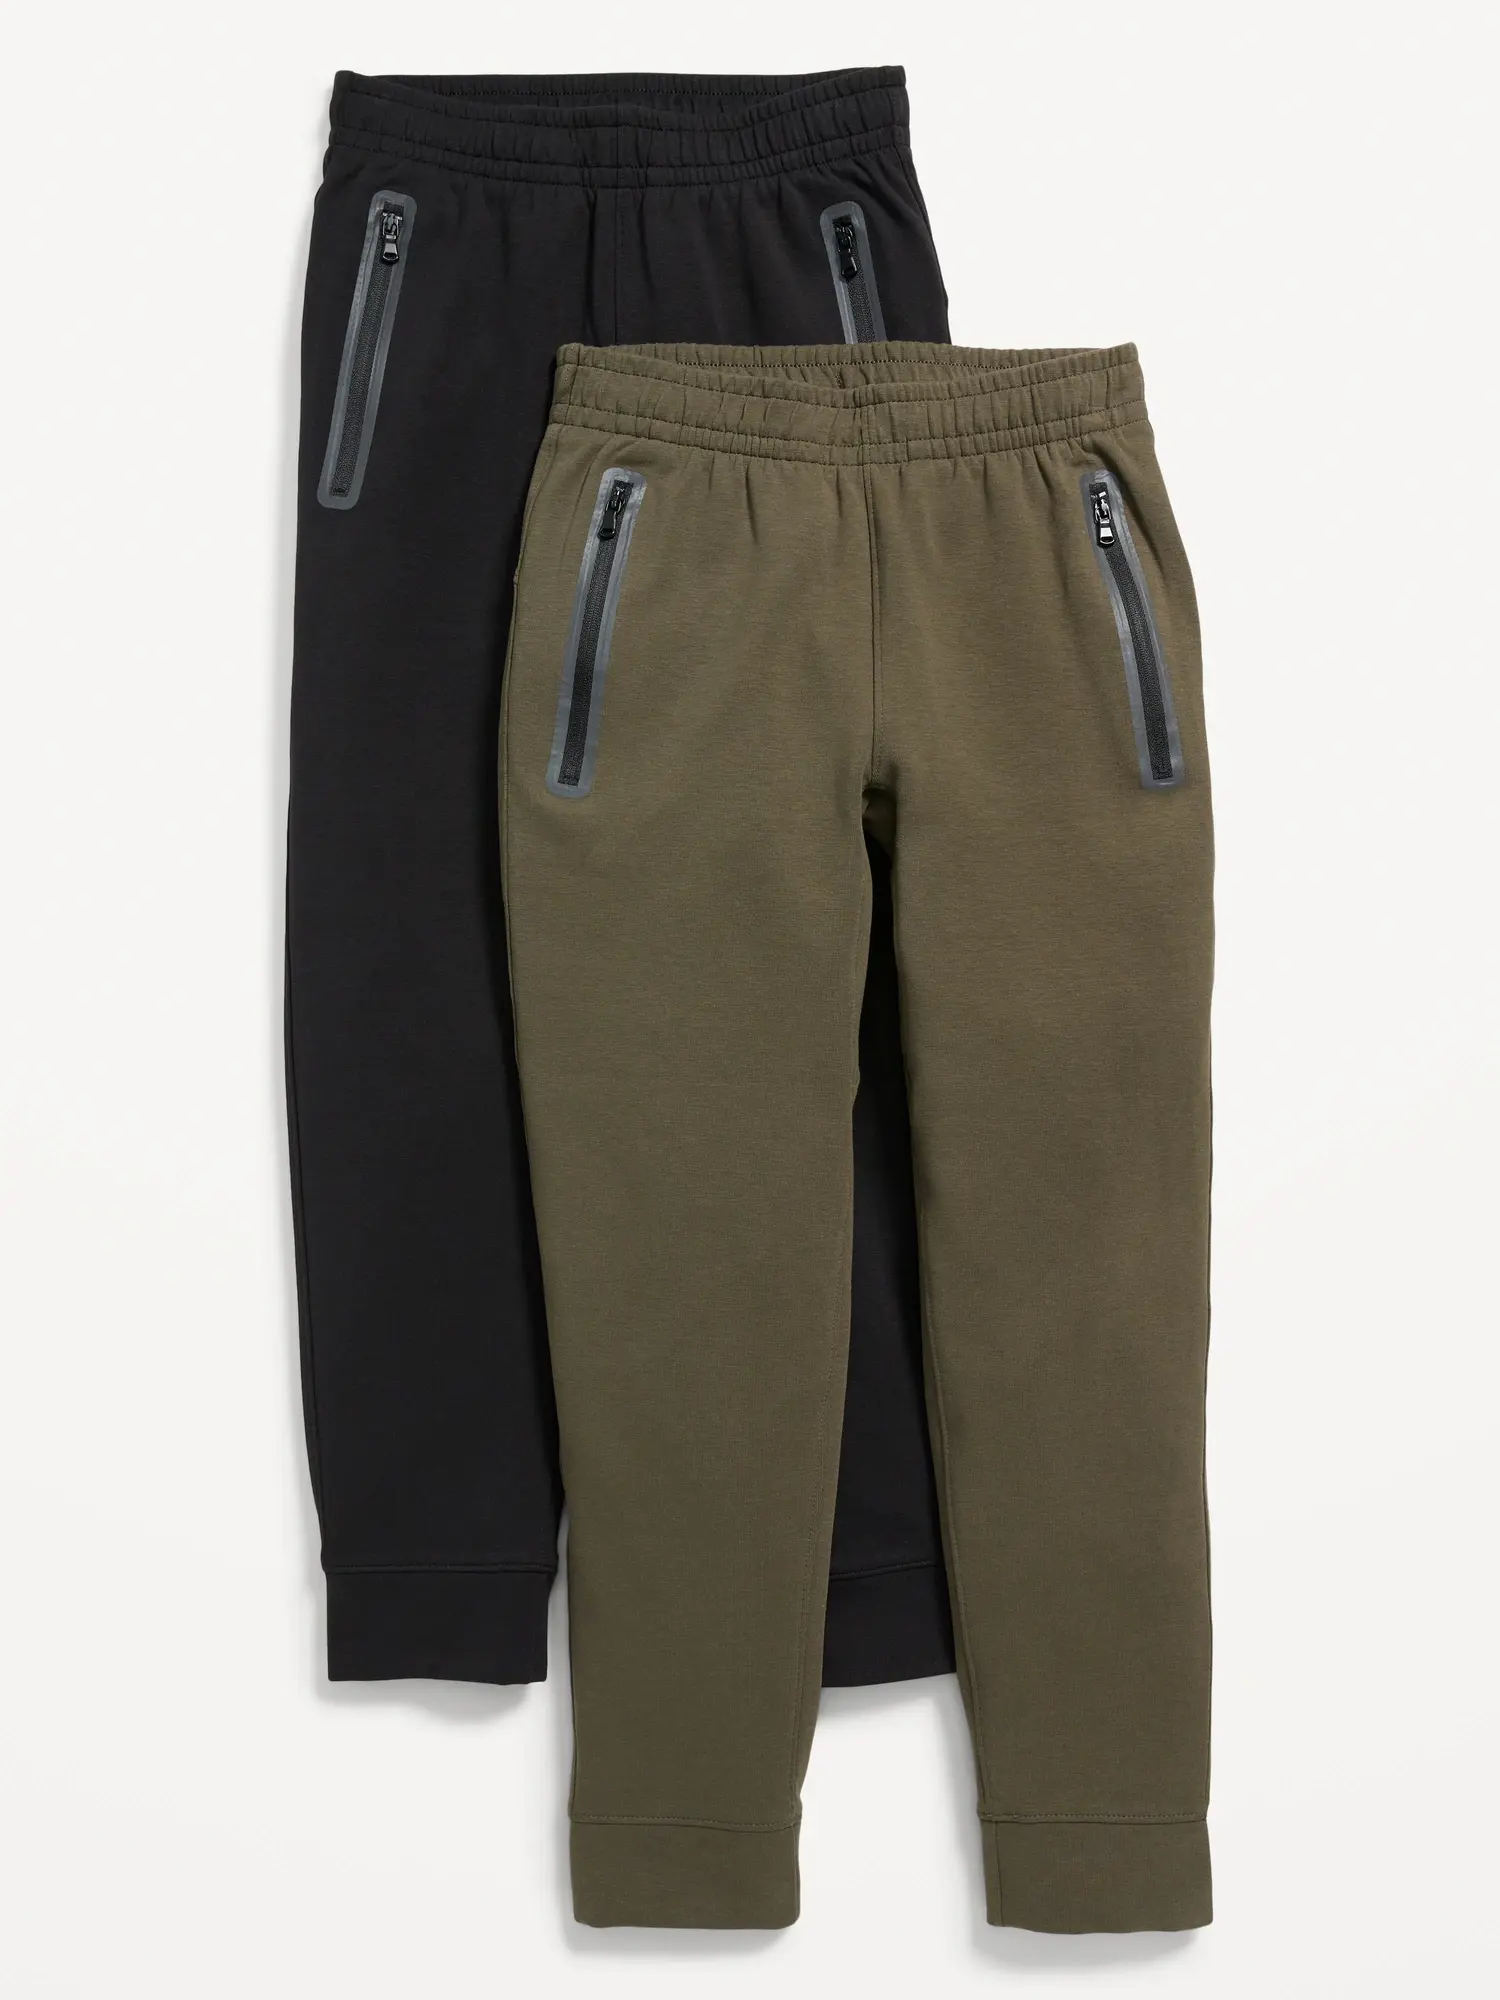 Old Navy - Dynamic Fleece Jogger Sweatpants 2-Pack for Boys green